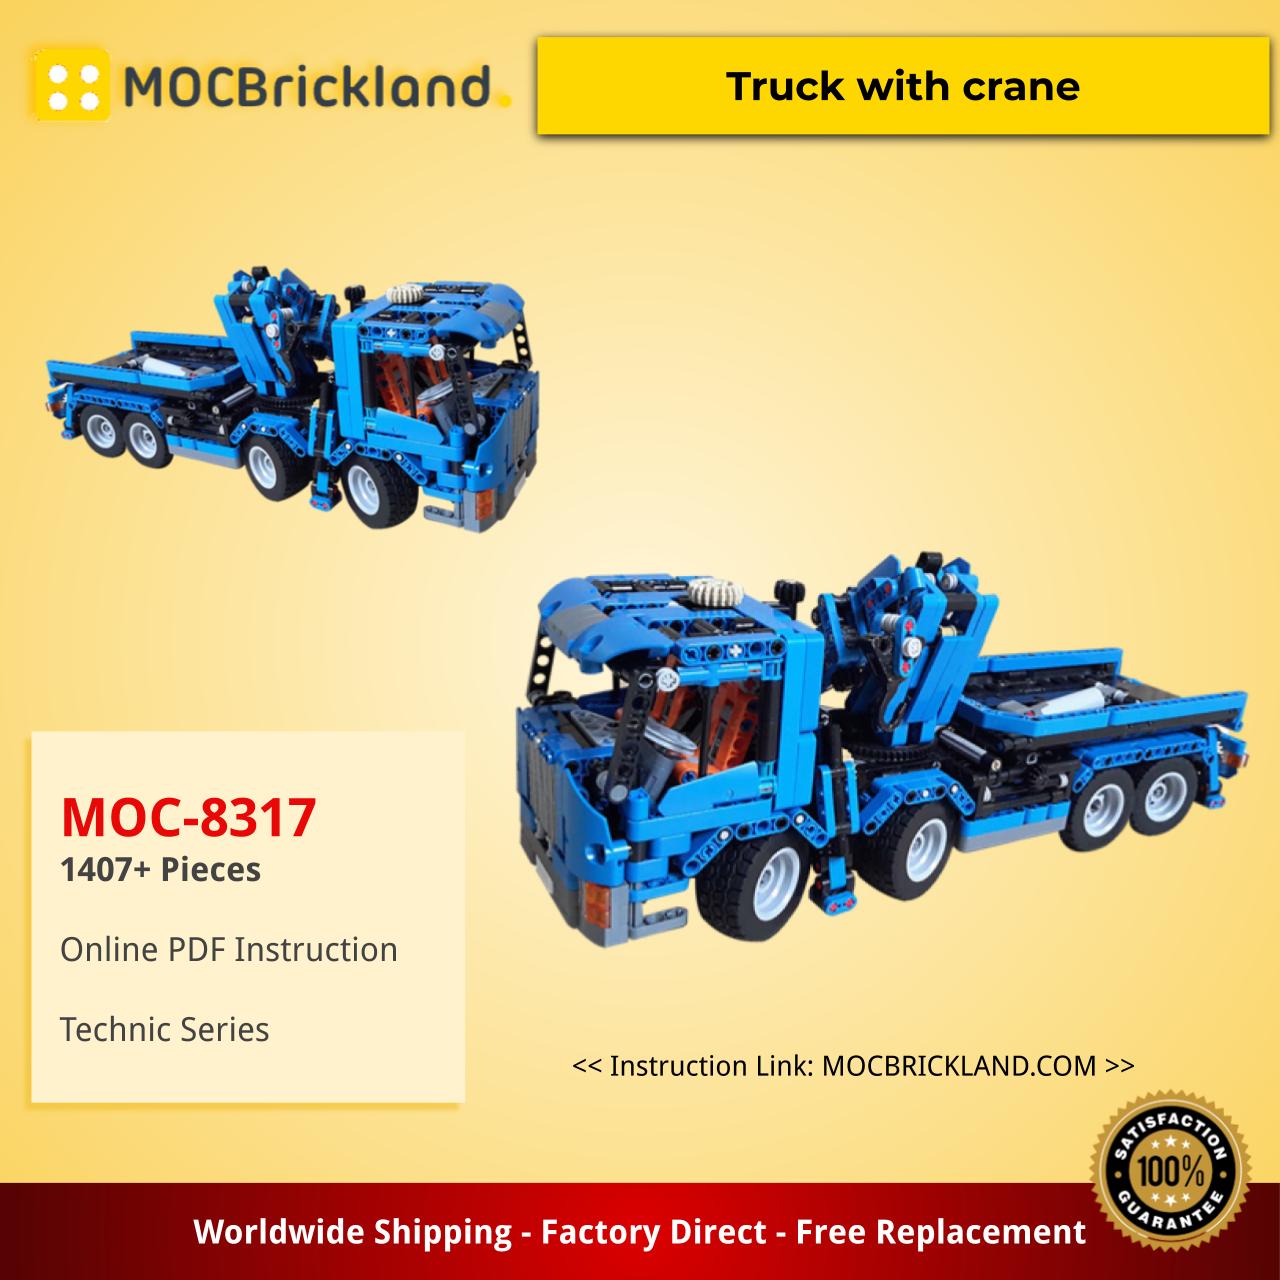 Technic MOC-8317 Truck with crane by ErikLeppen MOCBRICKLAND